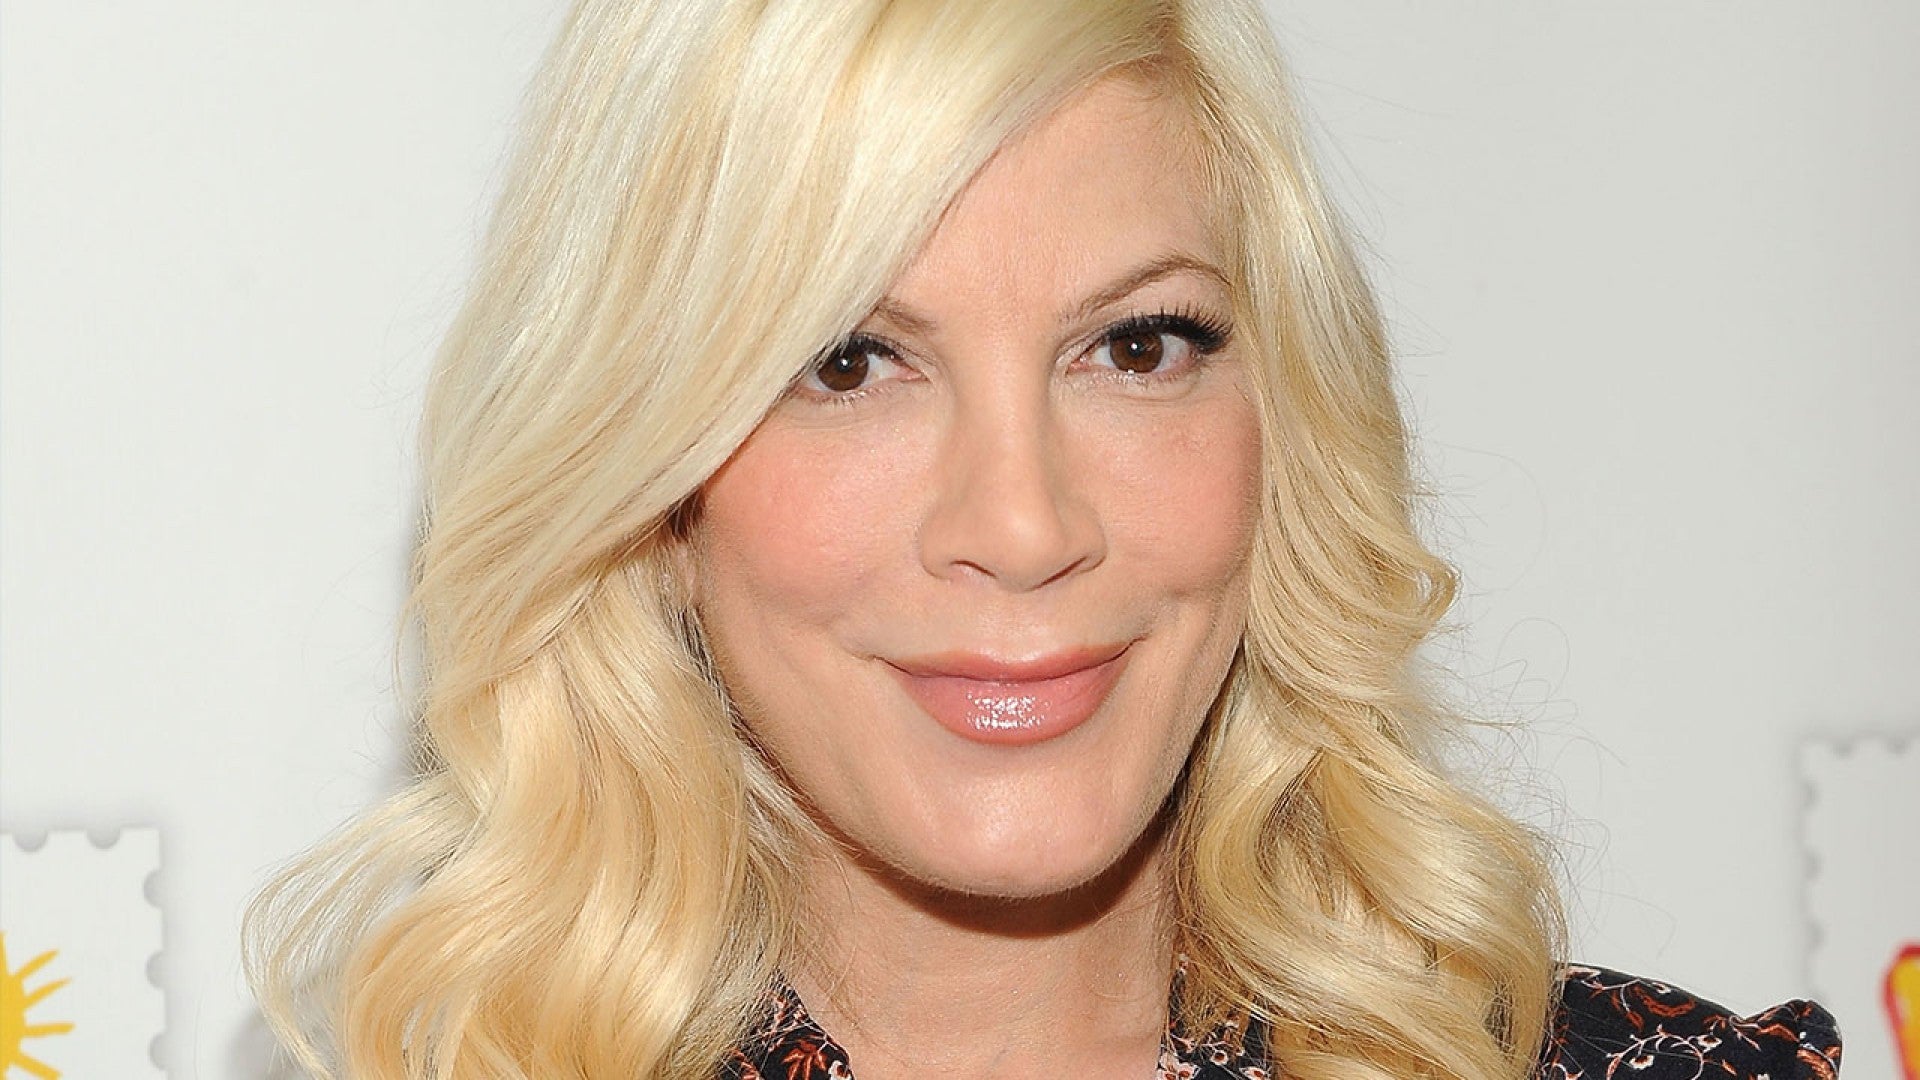 Nude pictures of tori spelling